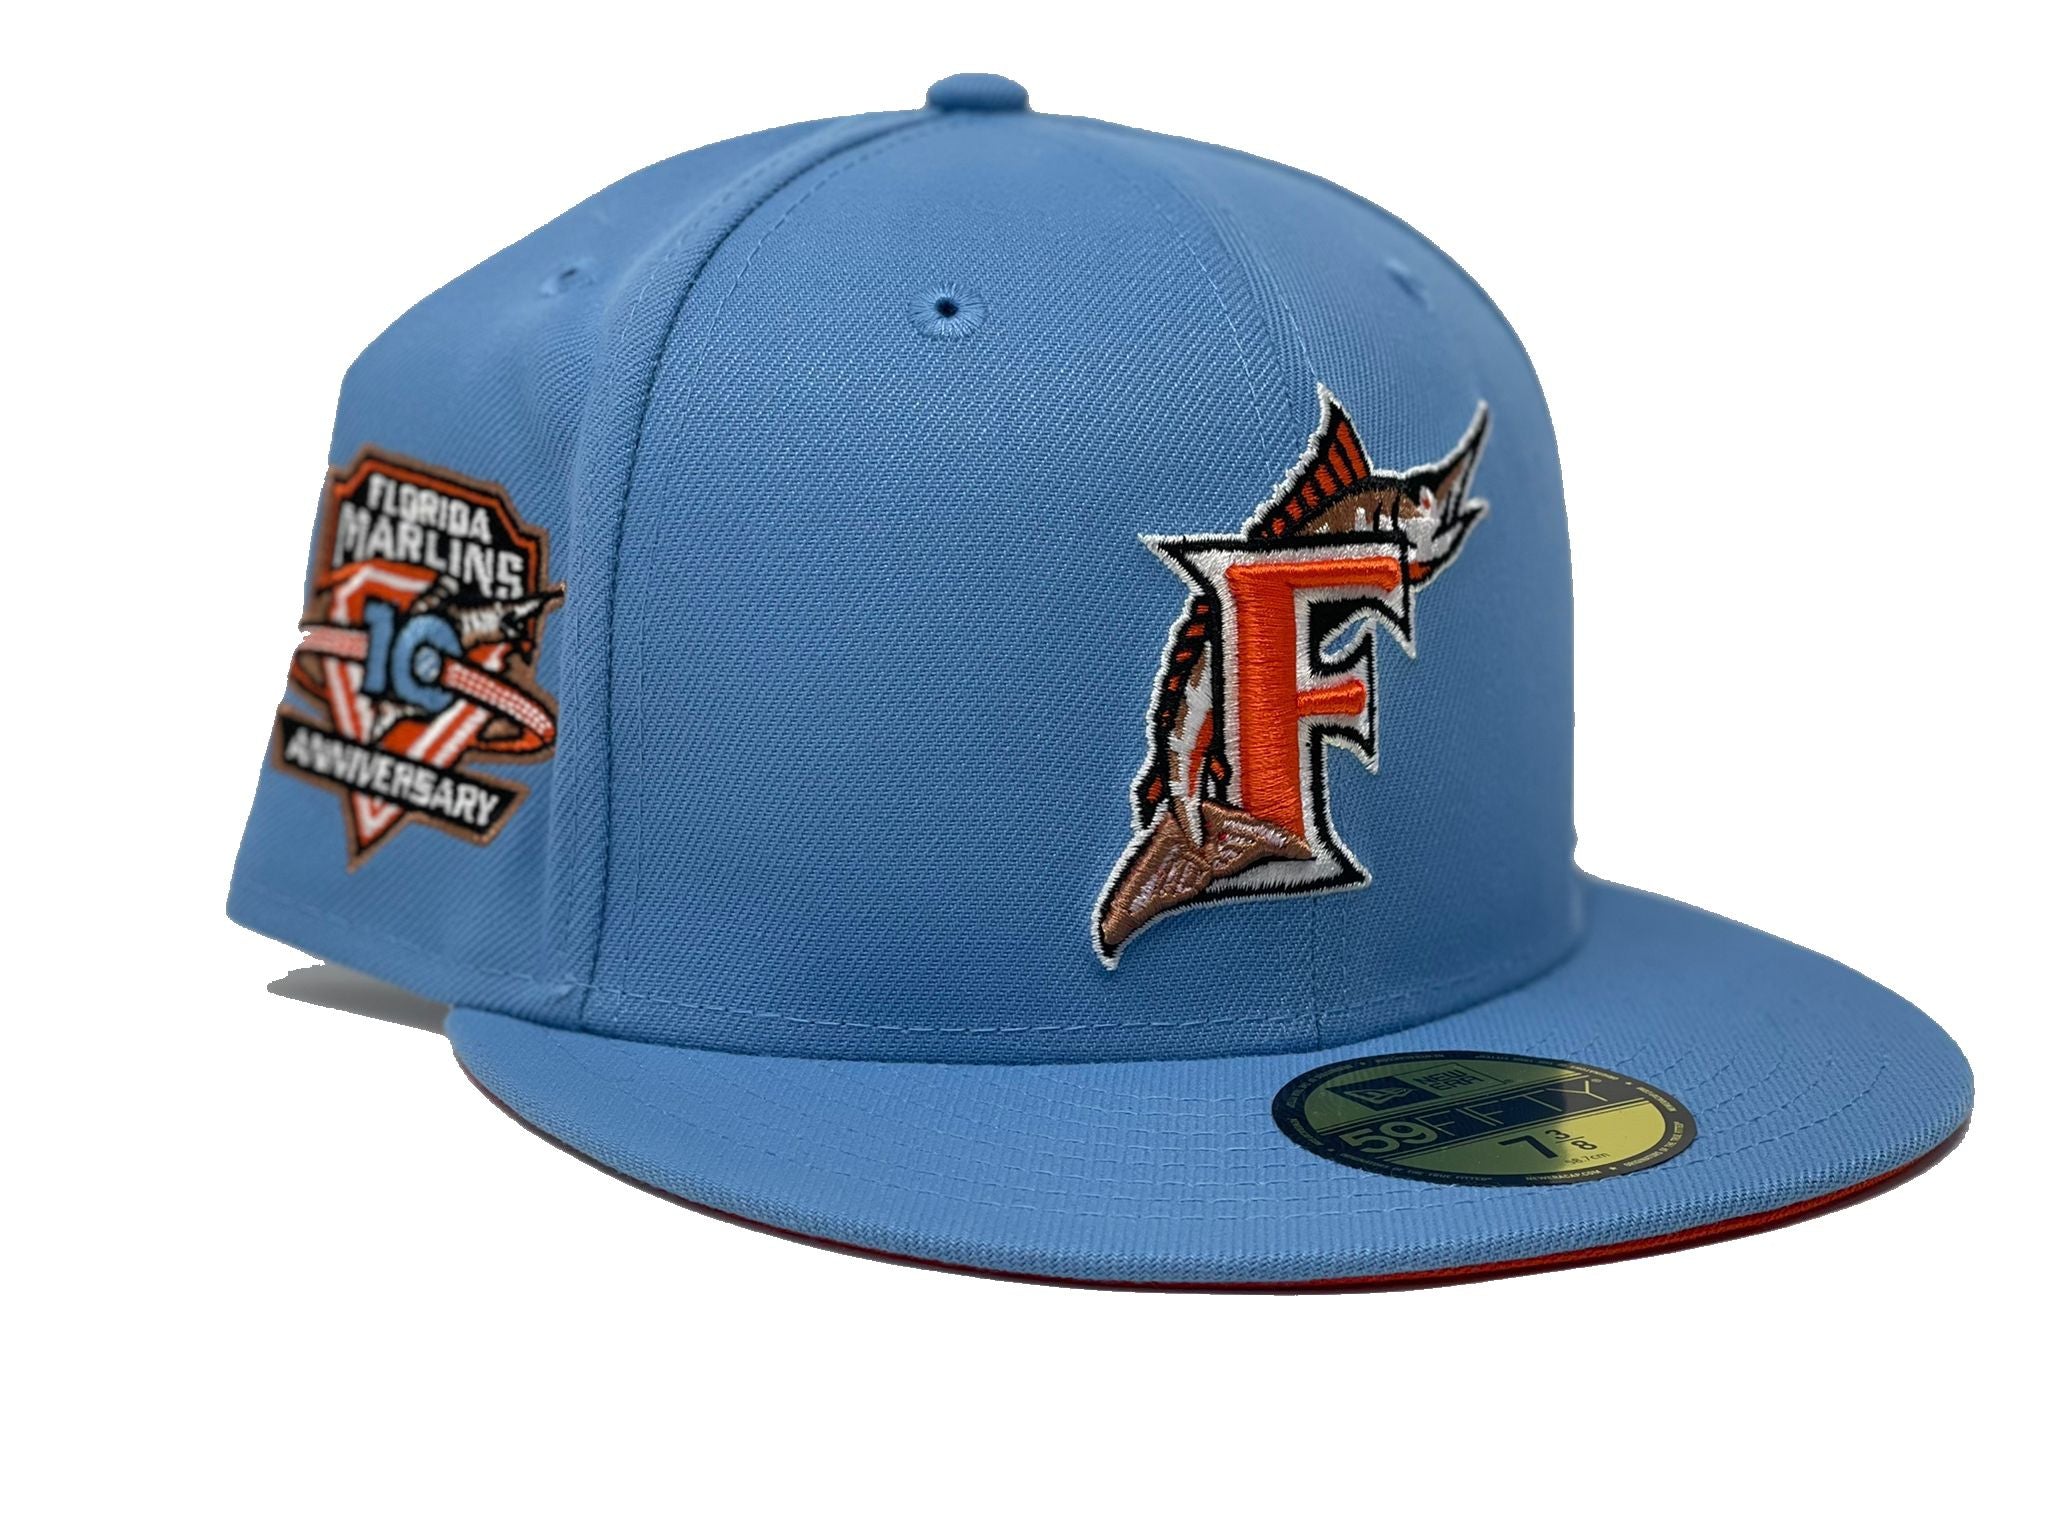 Men's New Era Tan Florida Marlins Inaugural Season Sky Blue Undervisor 59FIFTY Fitted Hat